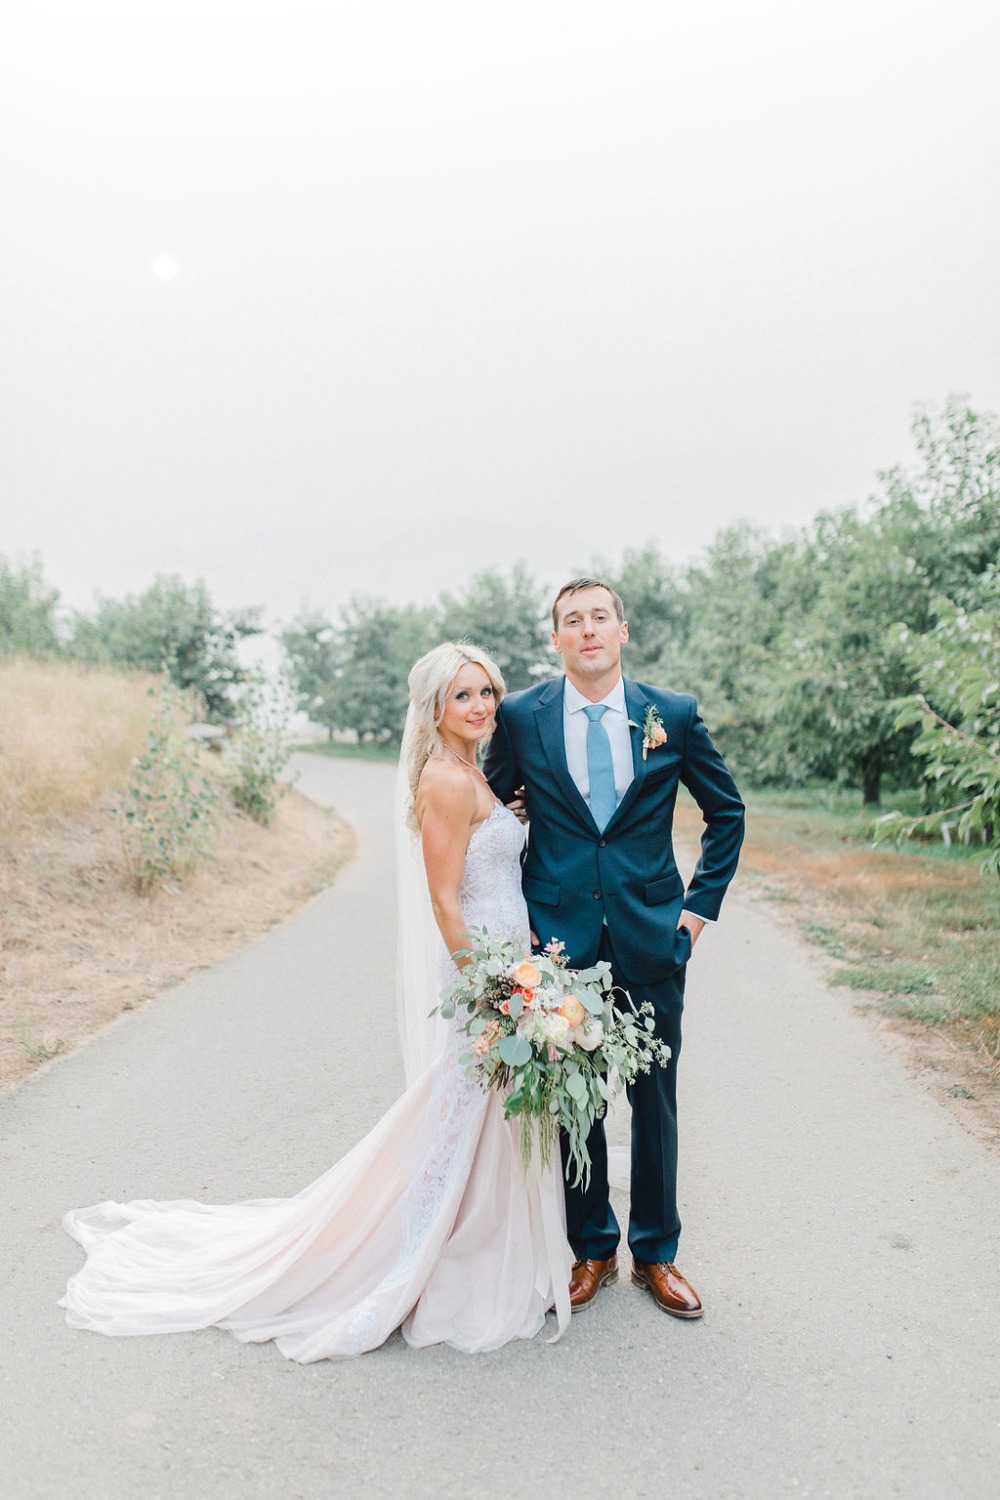 Chic shades of blue outdoor wedding